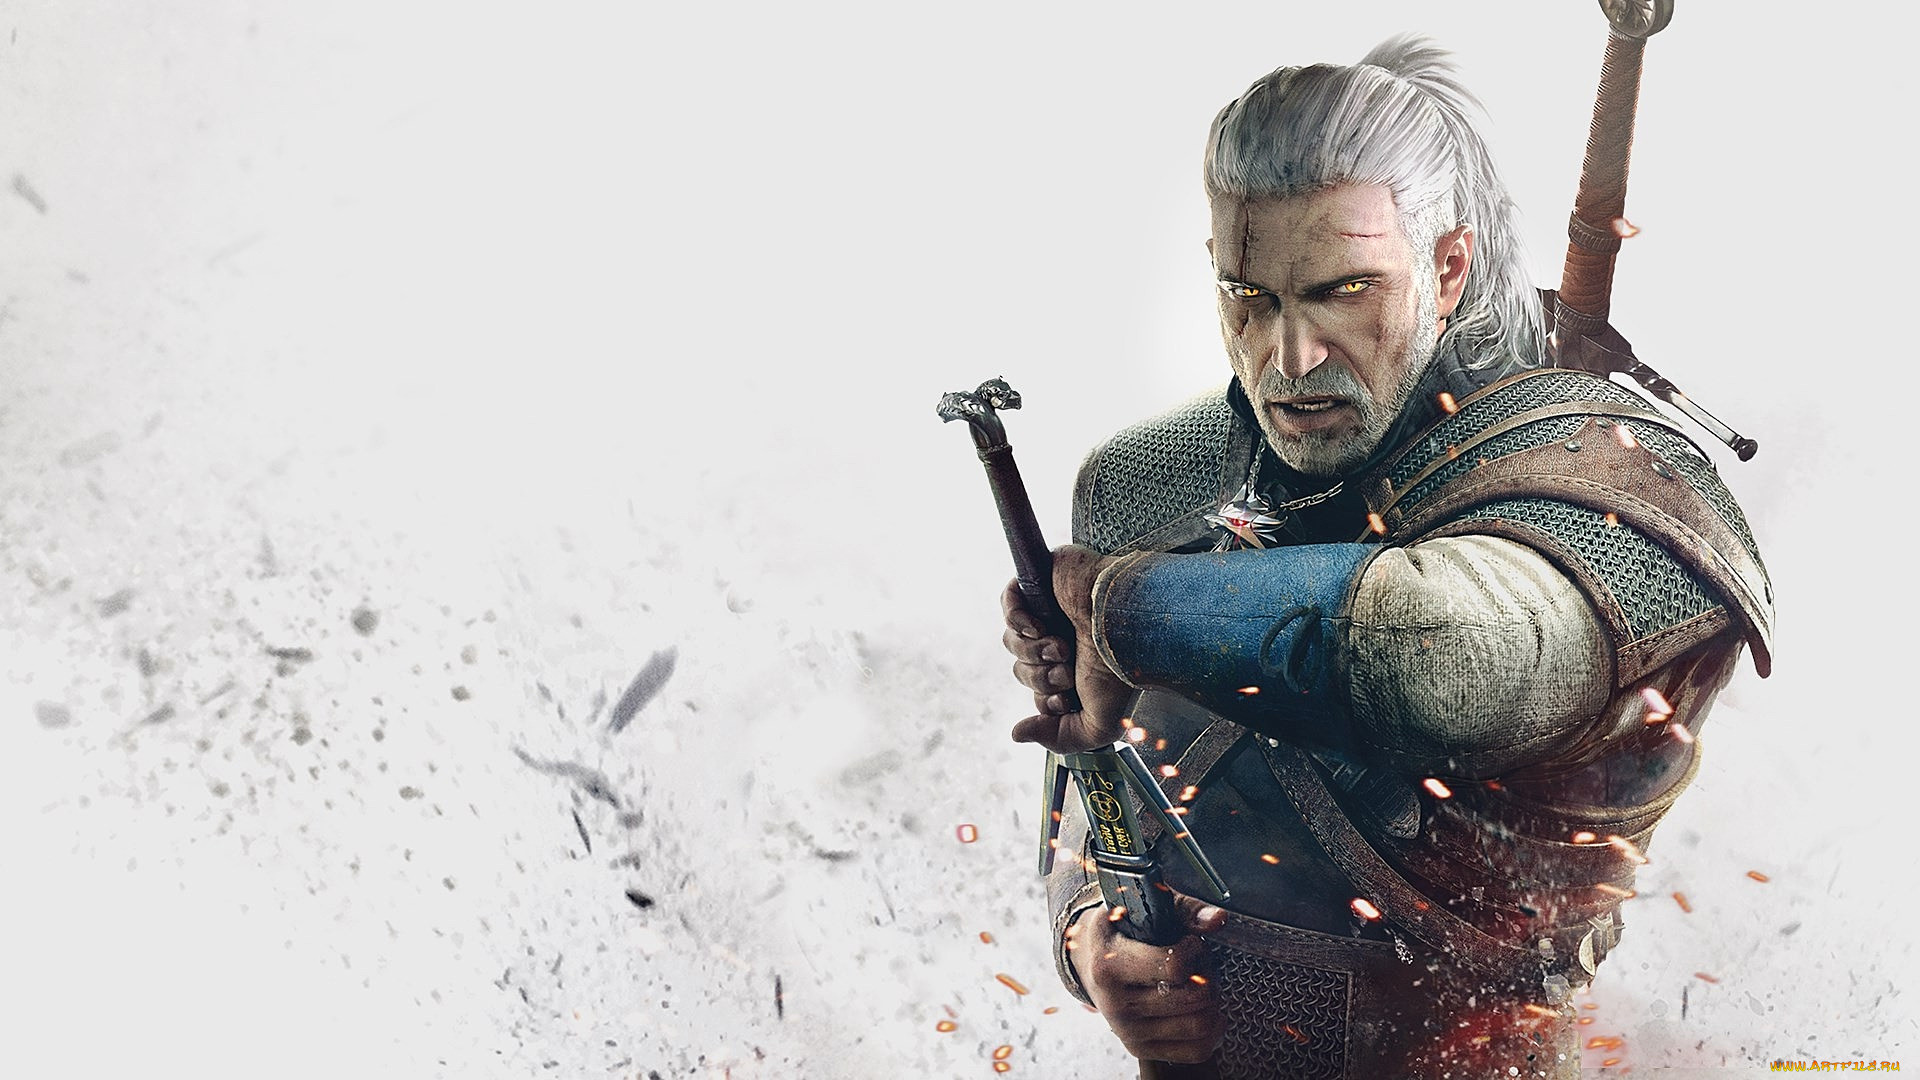 The Witcher 3: Wild Hunt — Game of The Year Edition